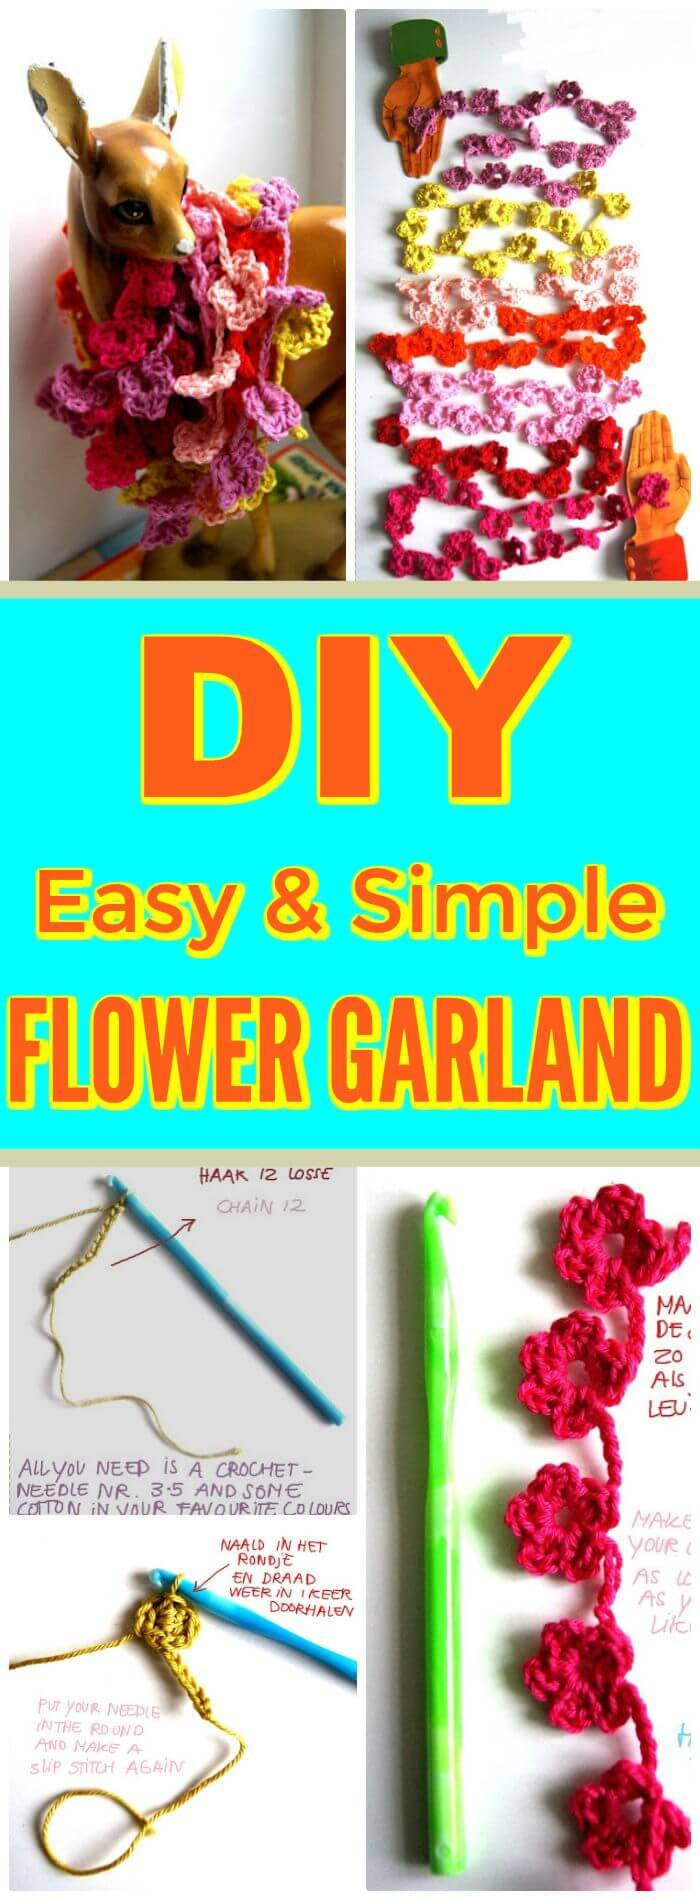 DIY Easy & Simple Flower Garland, Easy crochet flowers for beginners with free patterns!